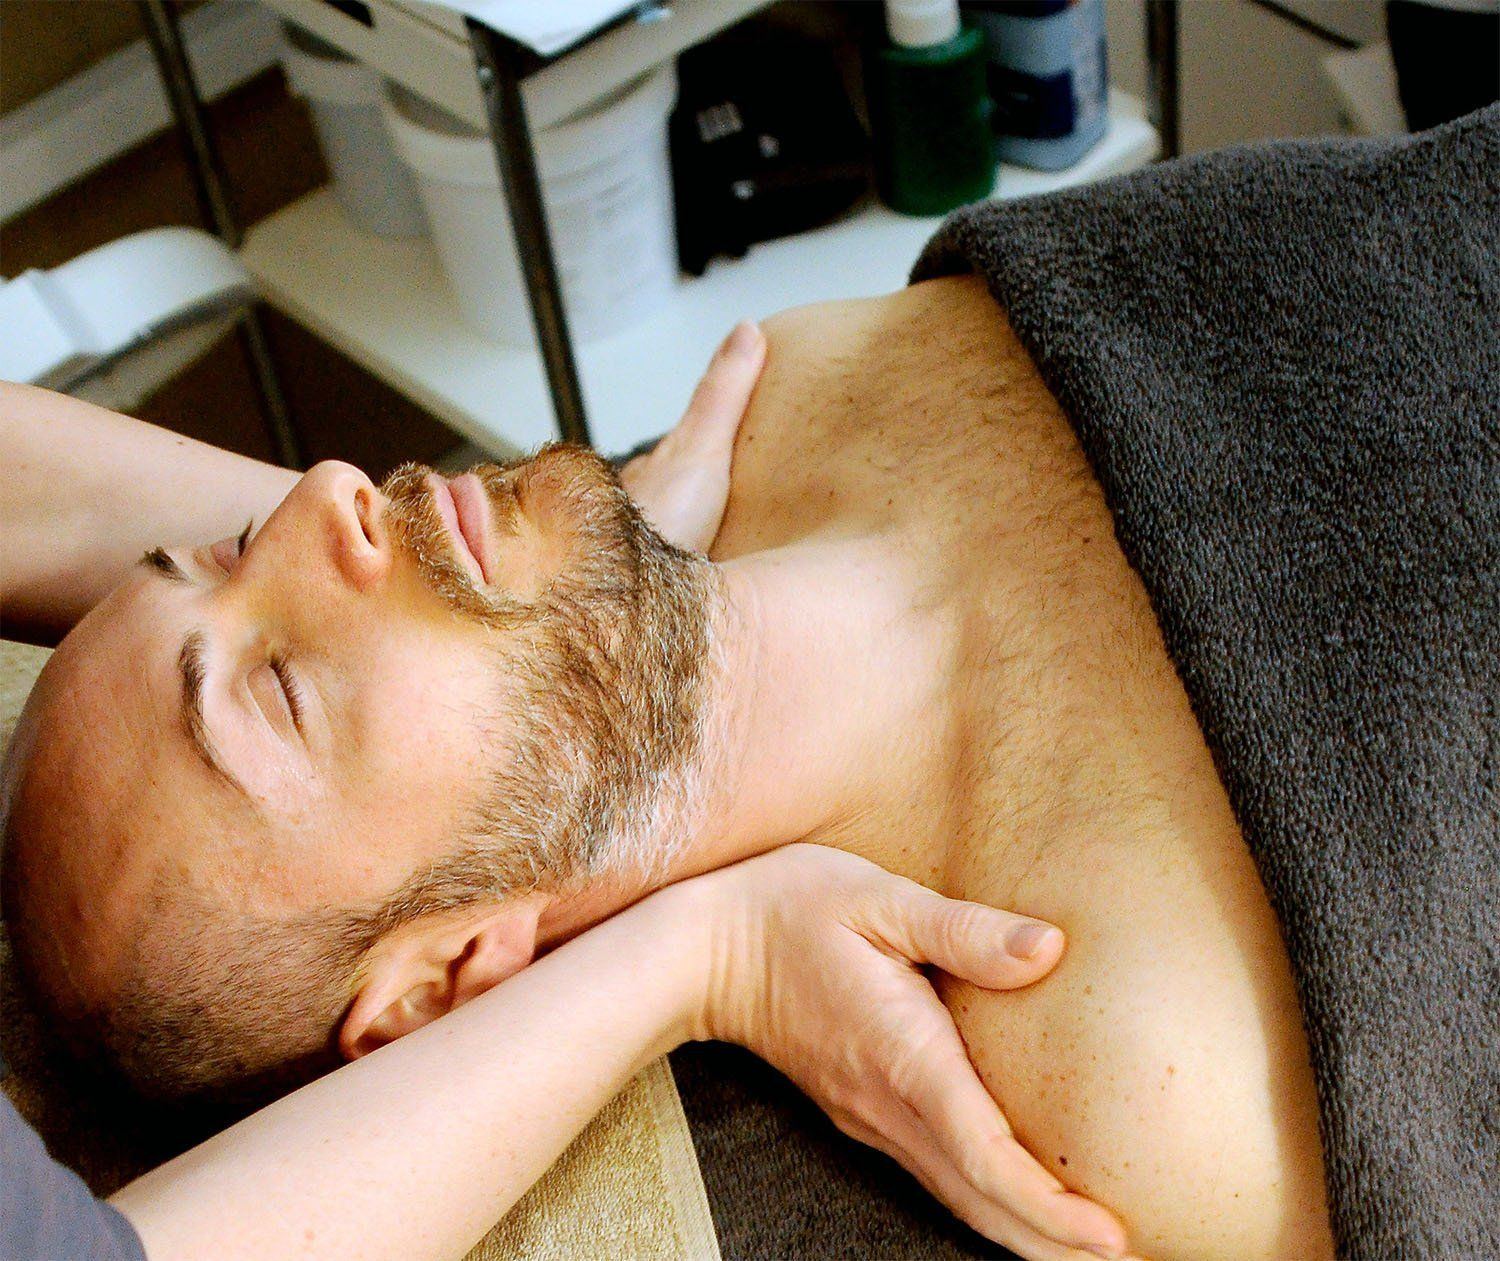 Gay nude massage therapists in austin texas